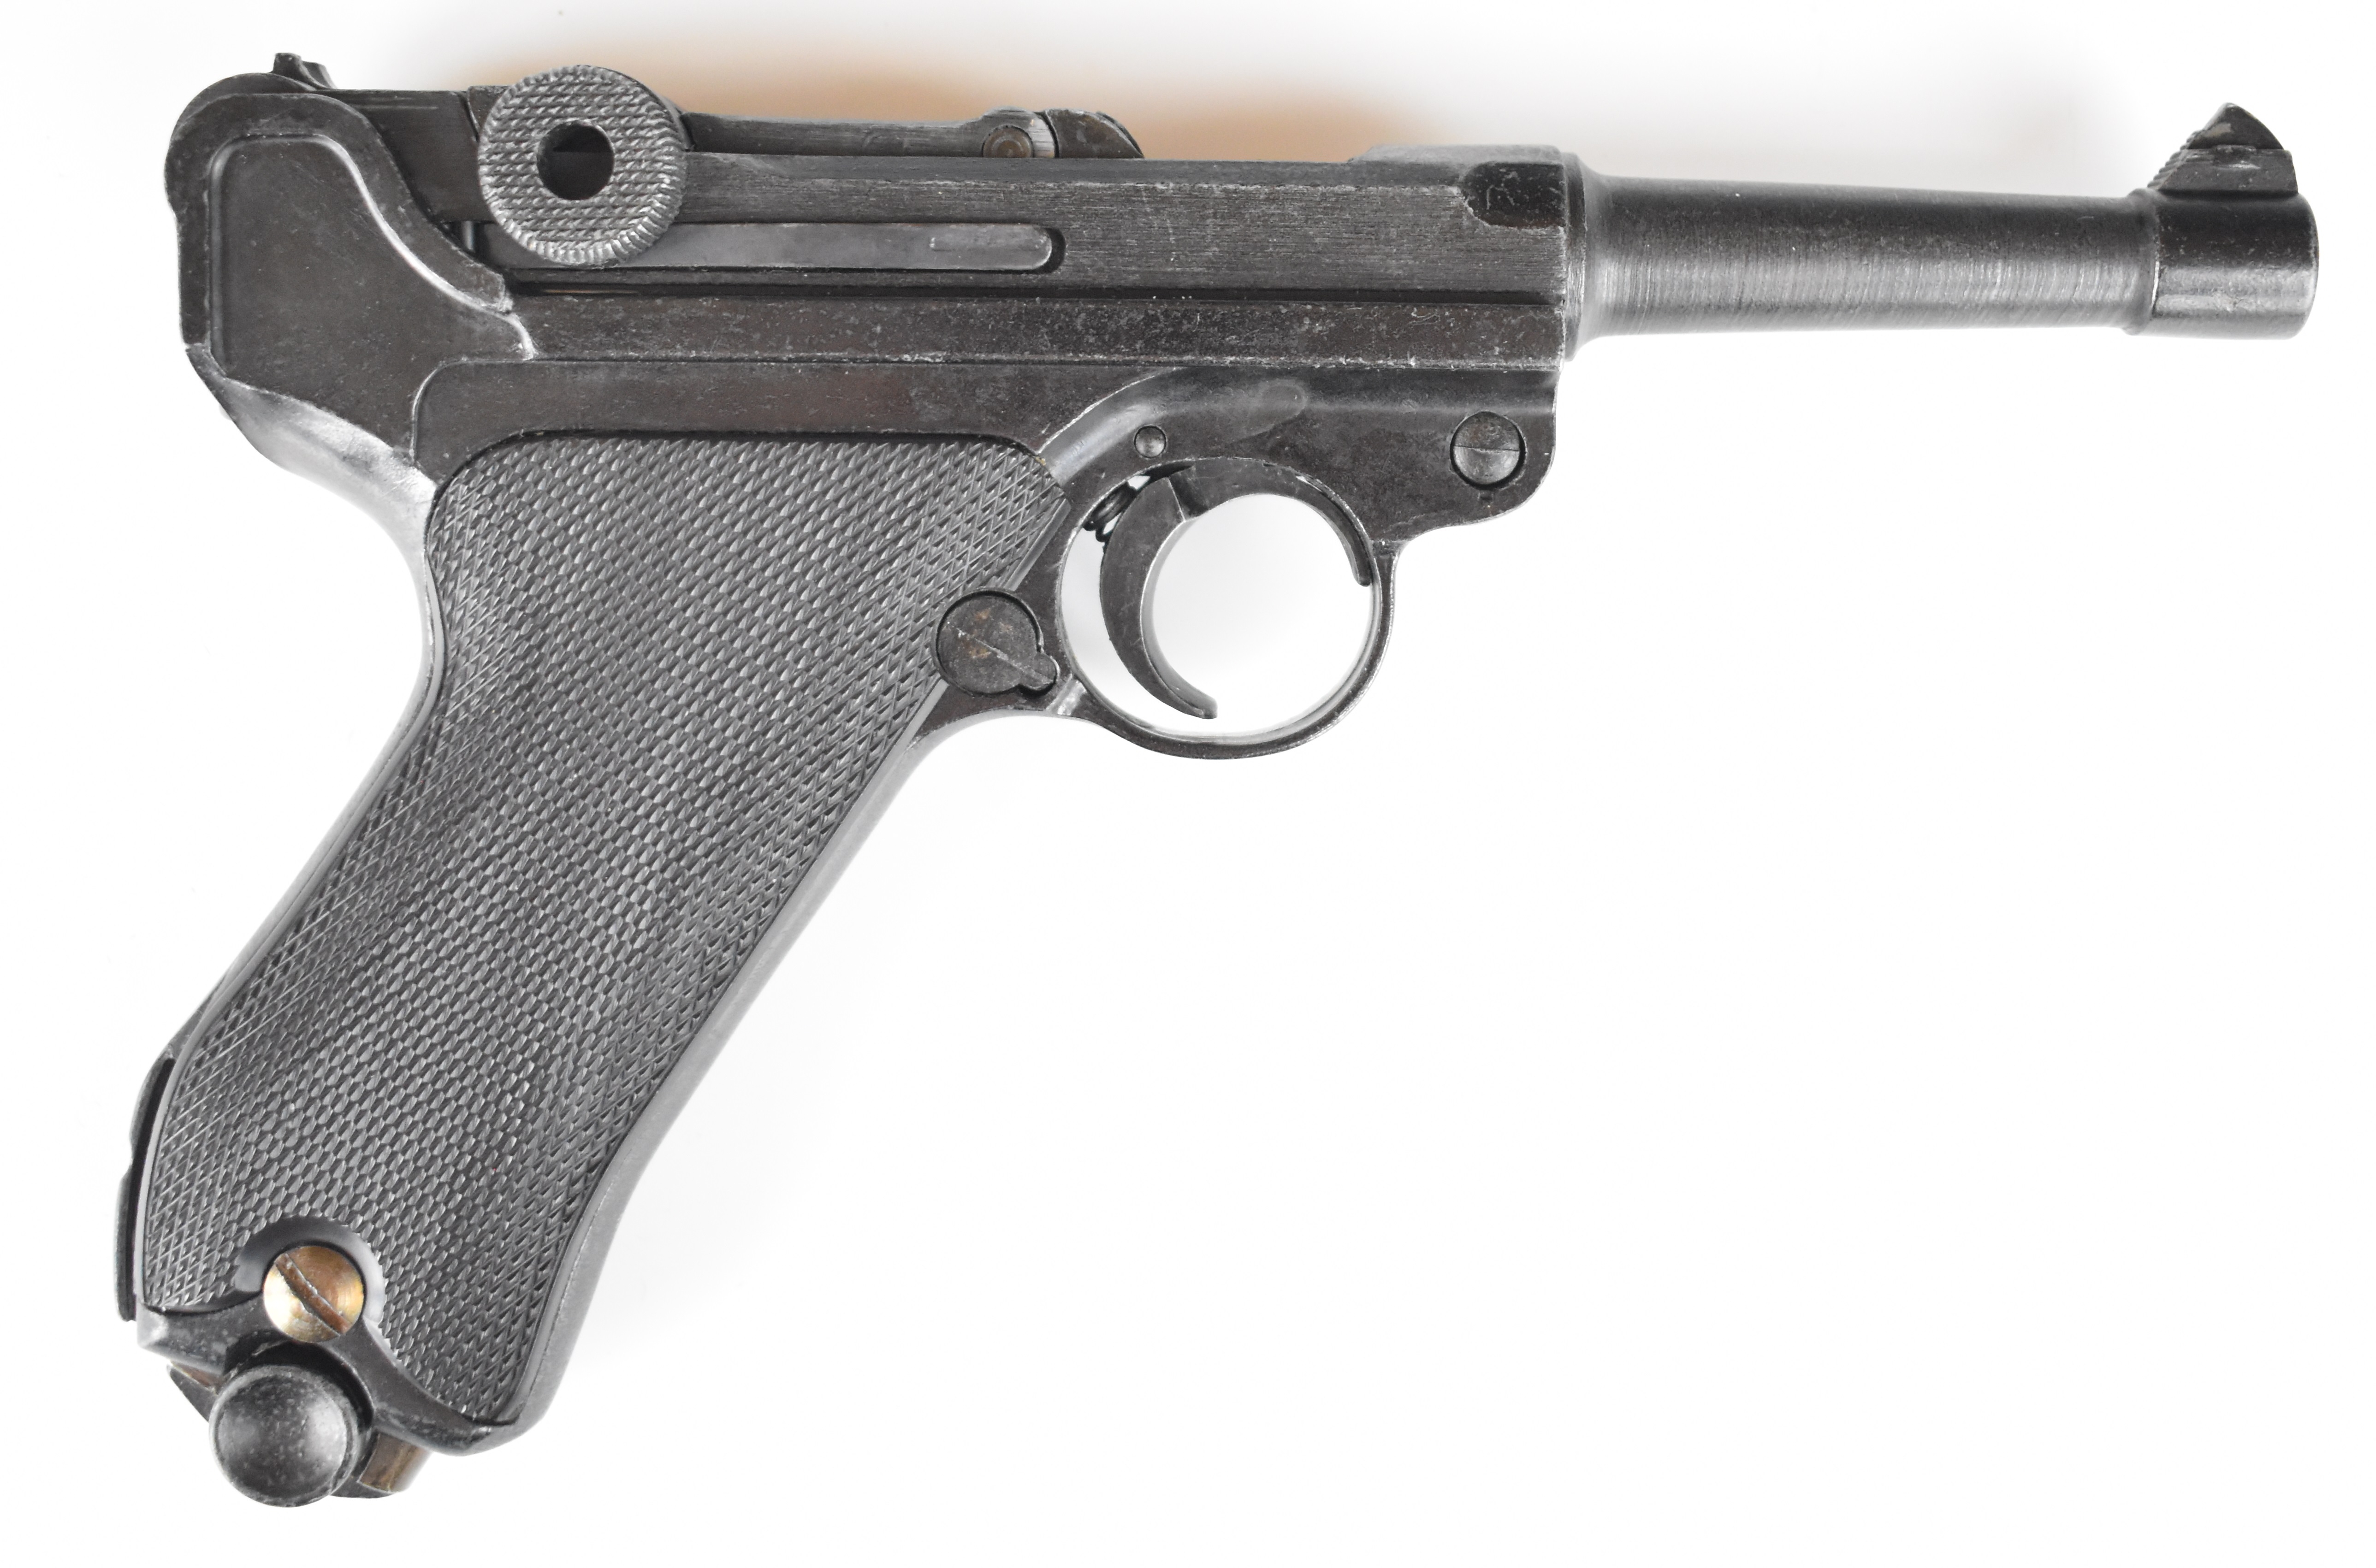 RMI P-08 Parabellum Selbstloade Militarish Luger pistol with chequered grips and dummy rounds, in - Image 14 of 24